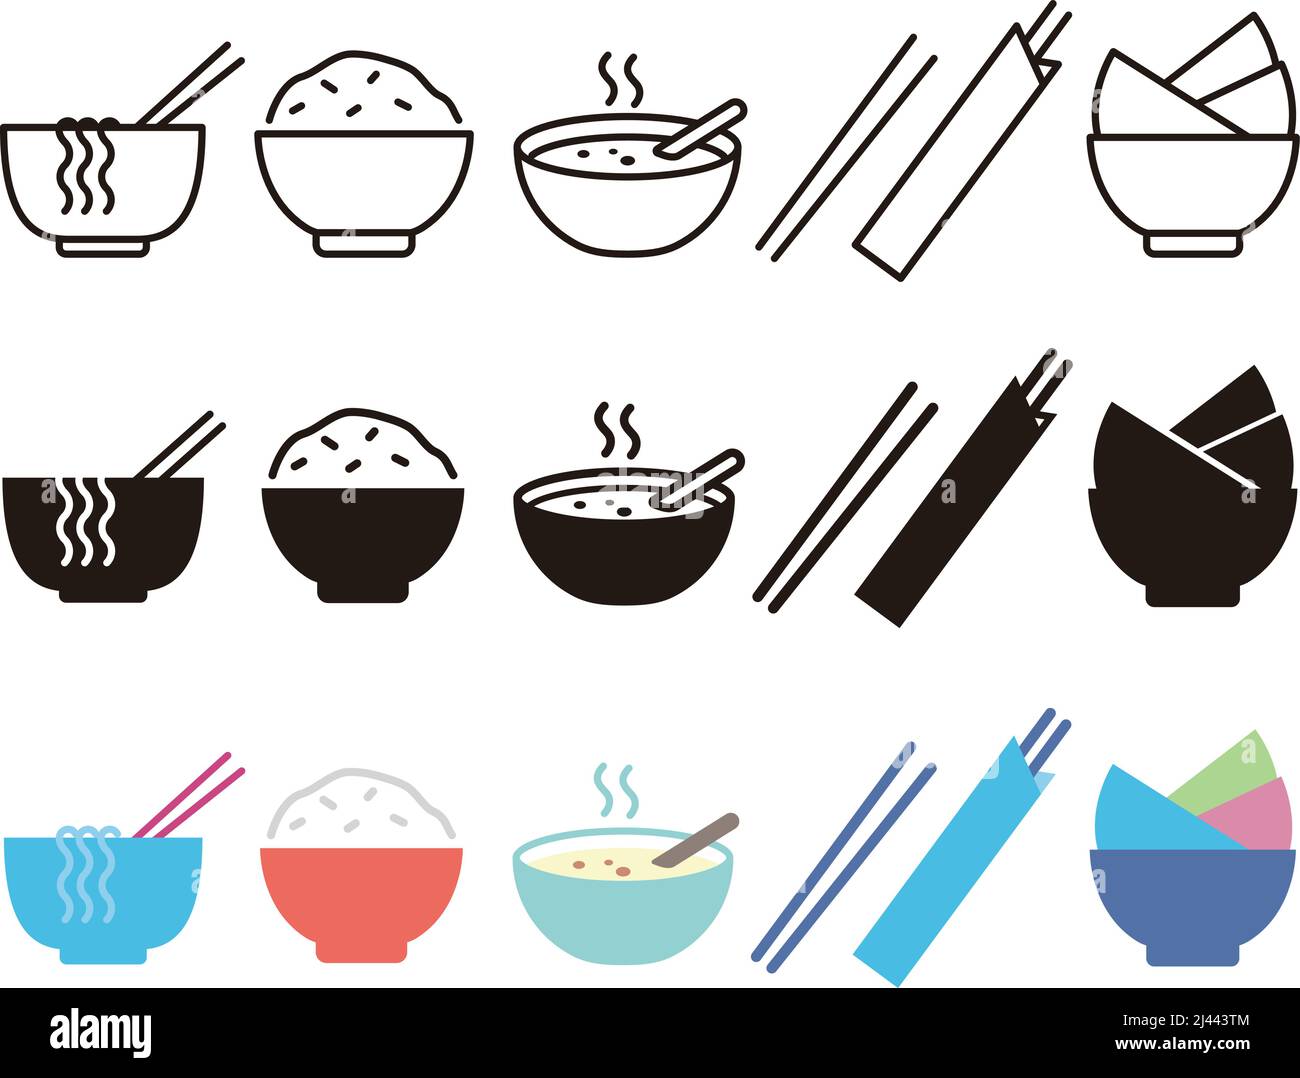 Bowl, rice, chopsticks and noodle icons, vector illustration Stock Vector